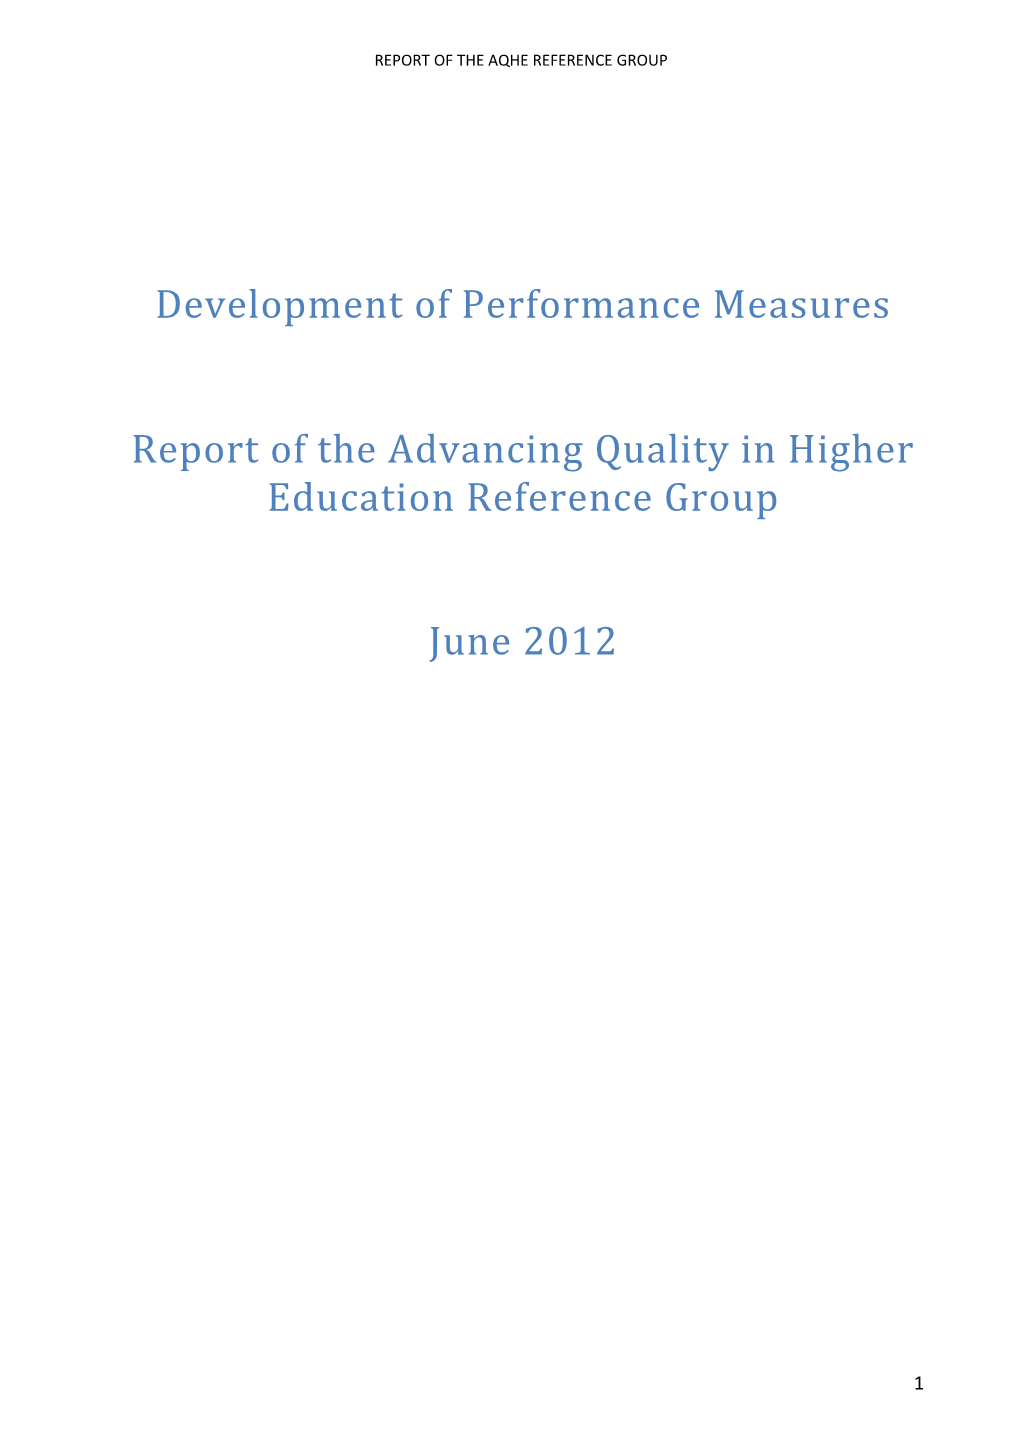 Report of the Advancing Quality in Higher Education Reference Group